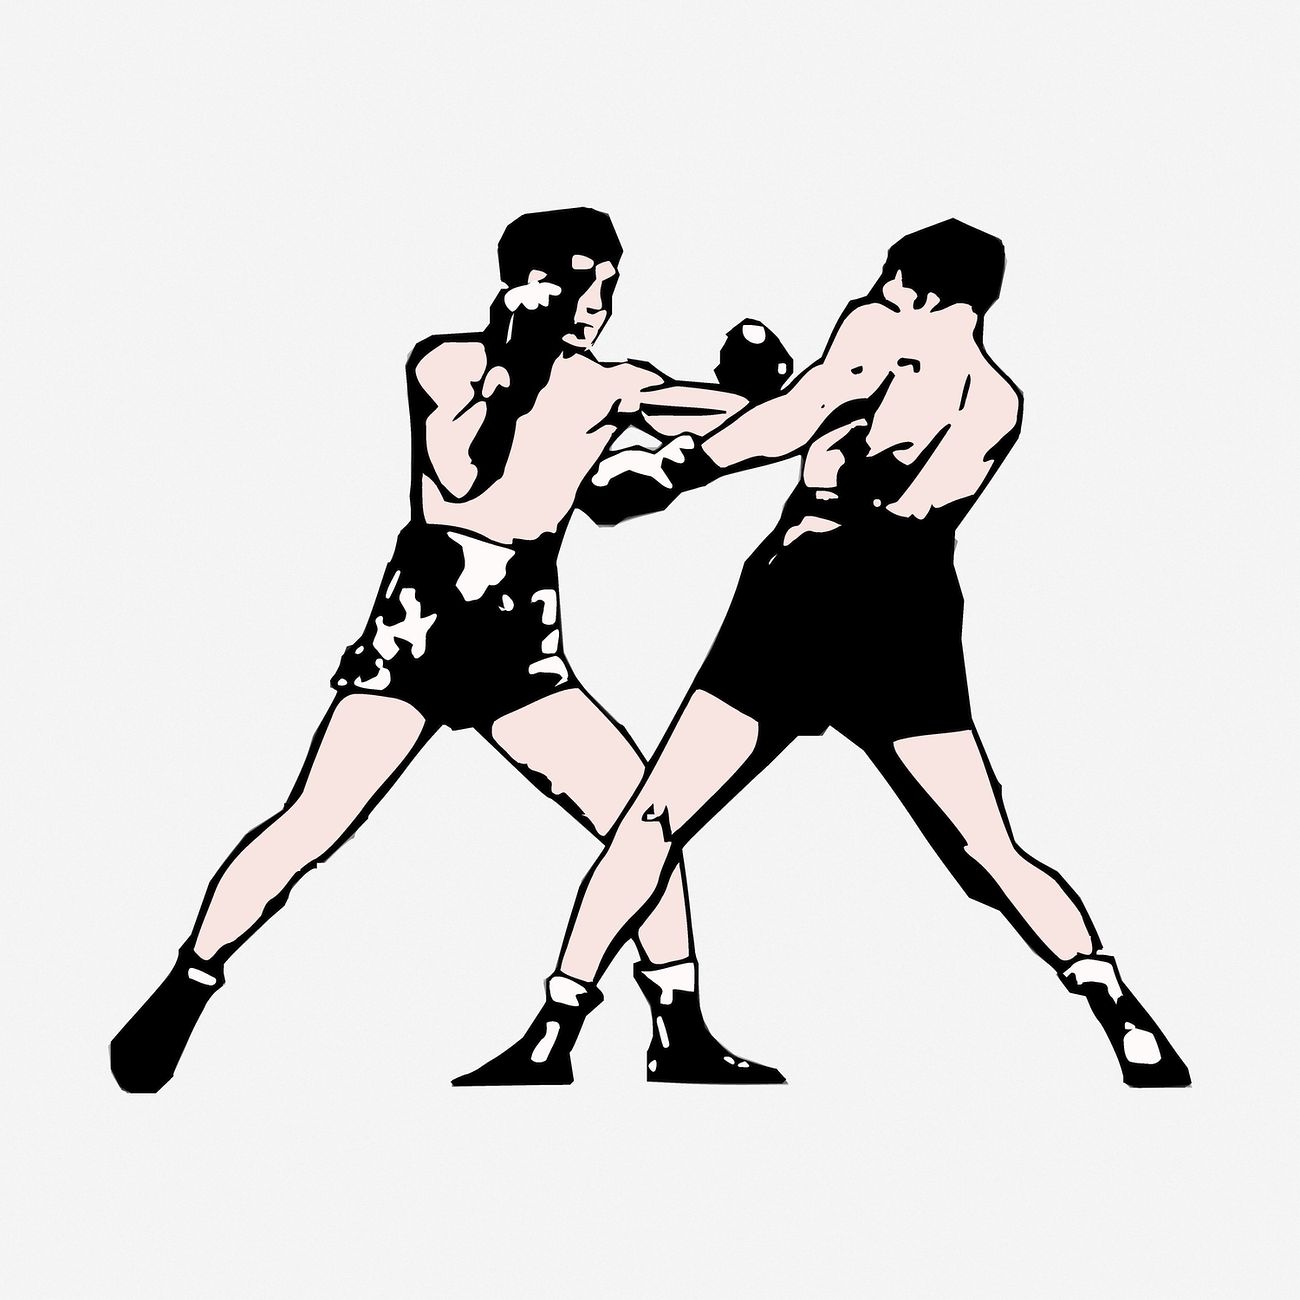 Boxers fighting drawing, sport vintage